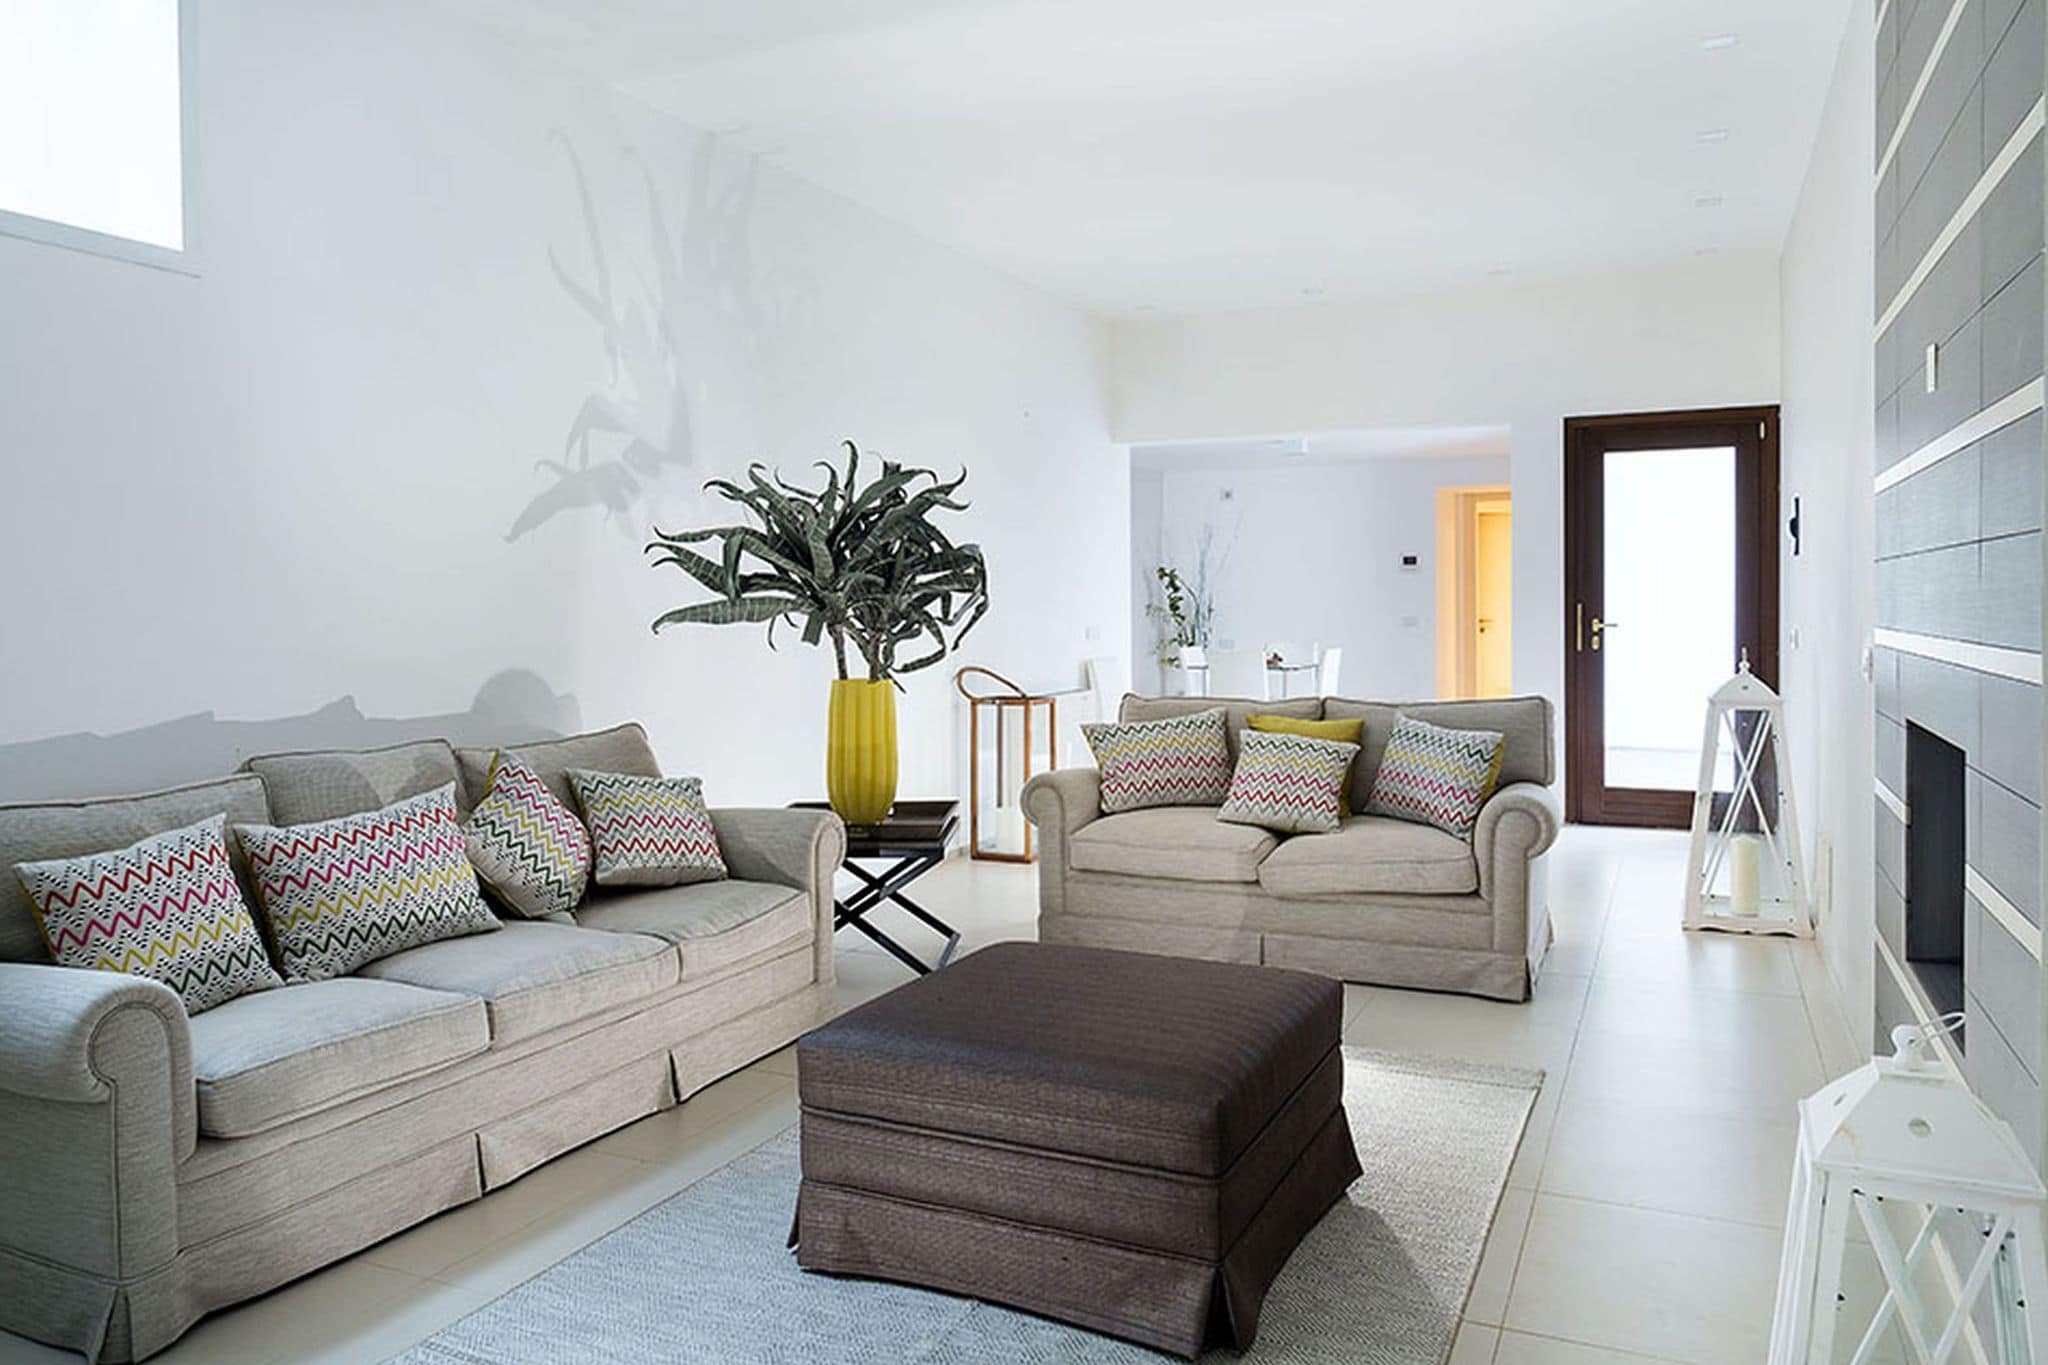 Elegant house in Cefalù, only 100m from the sea with stunning views and garden!